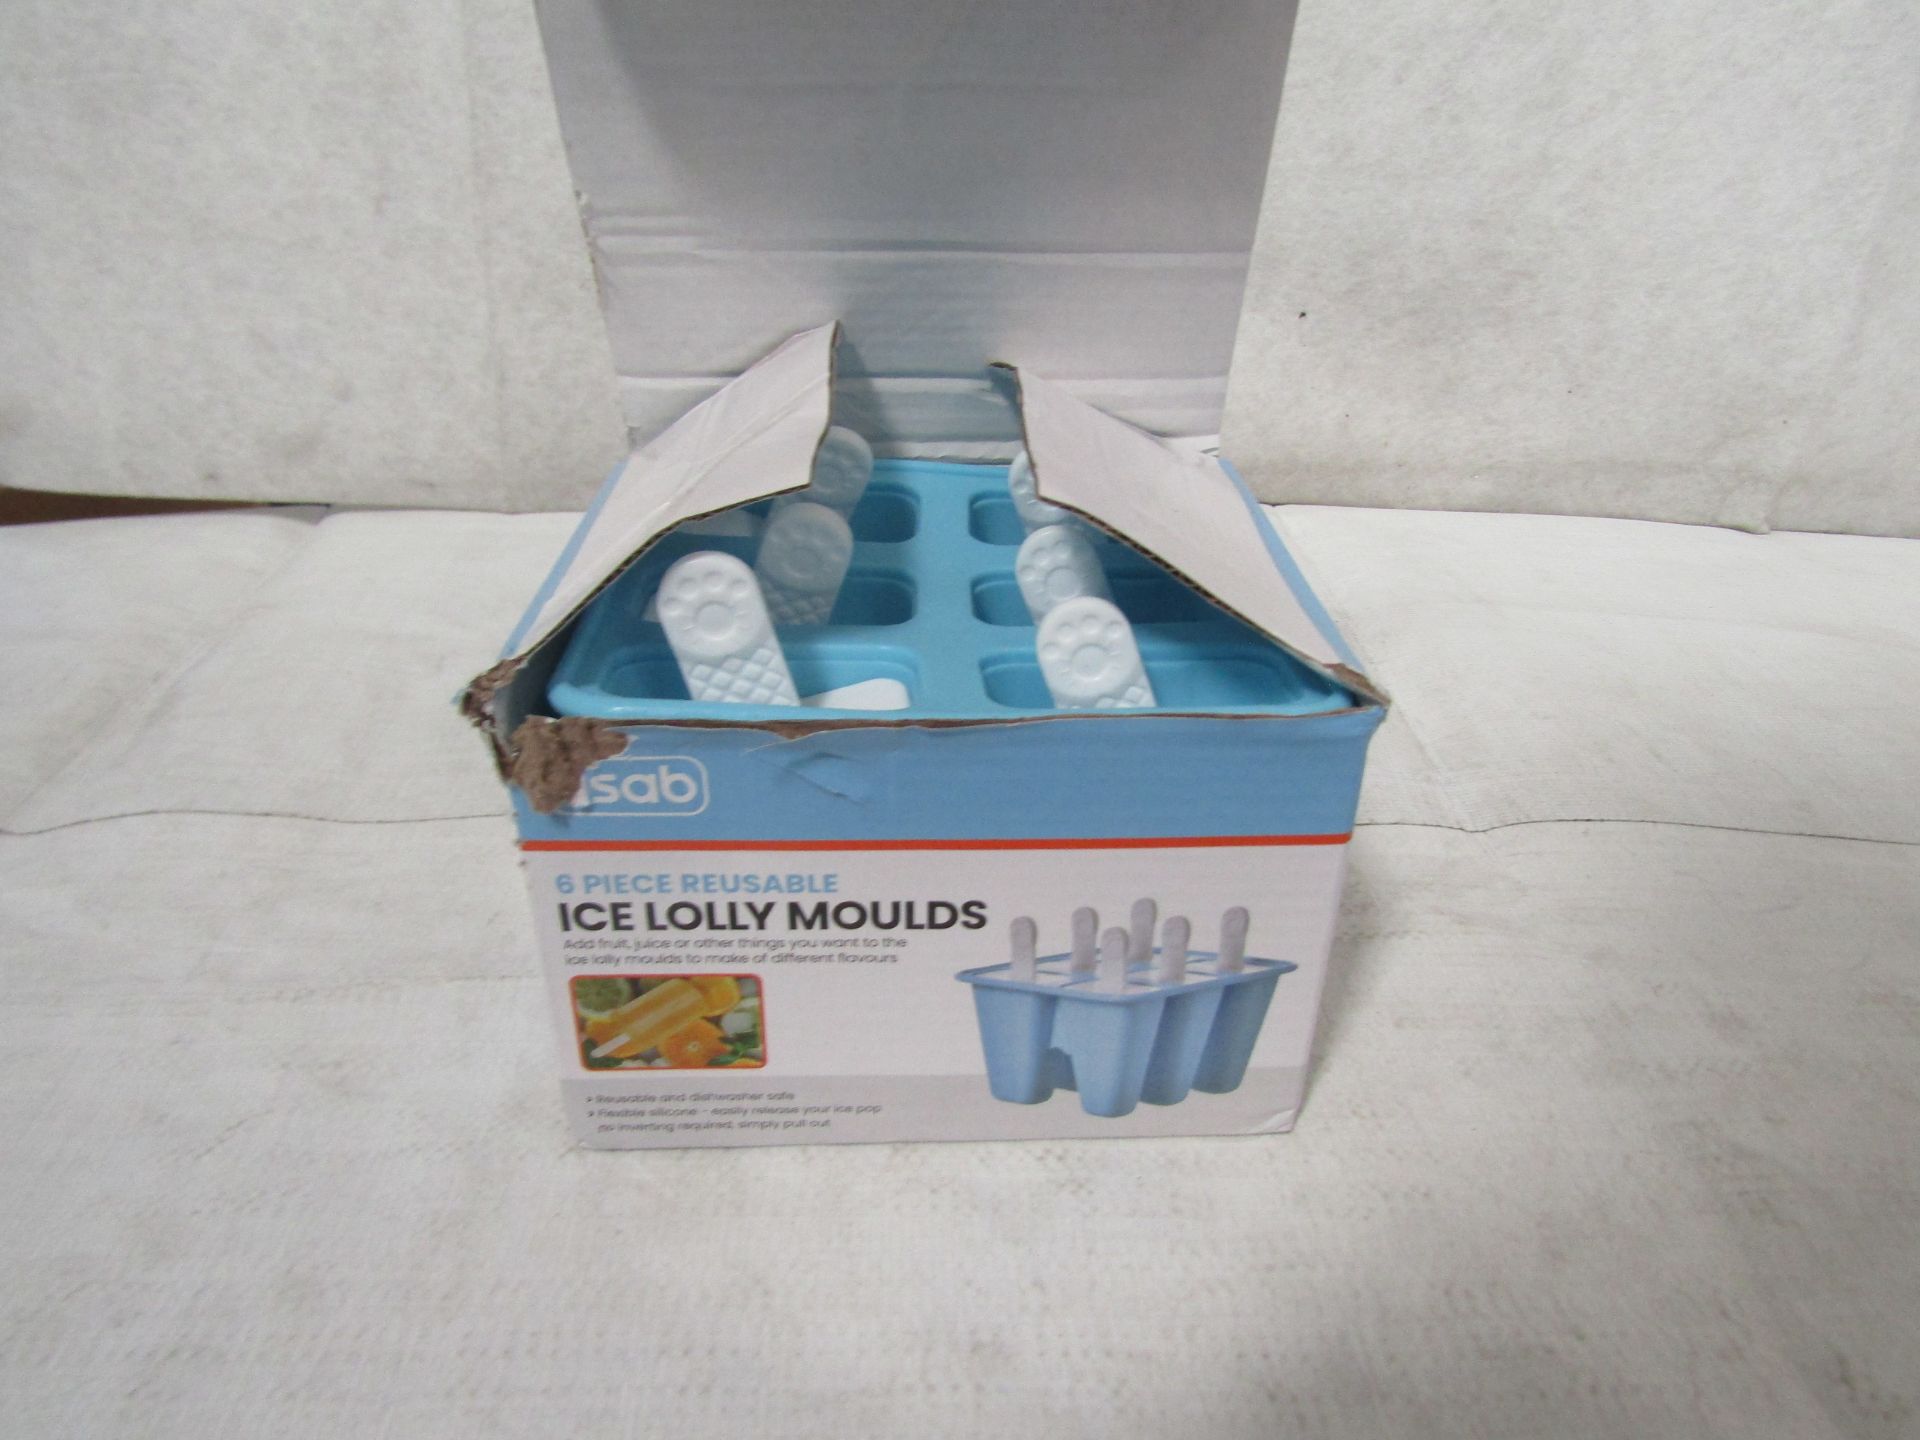 Asab - 6-Piece Reuseable Ice Lolly Moulds - Boxed.